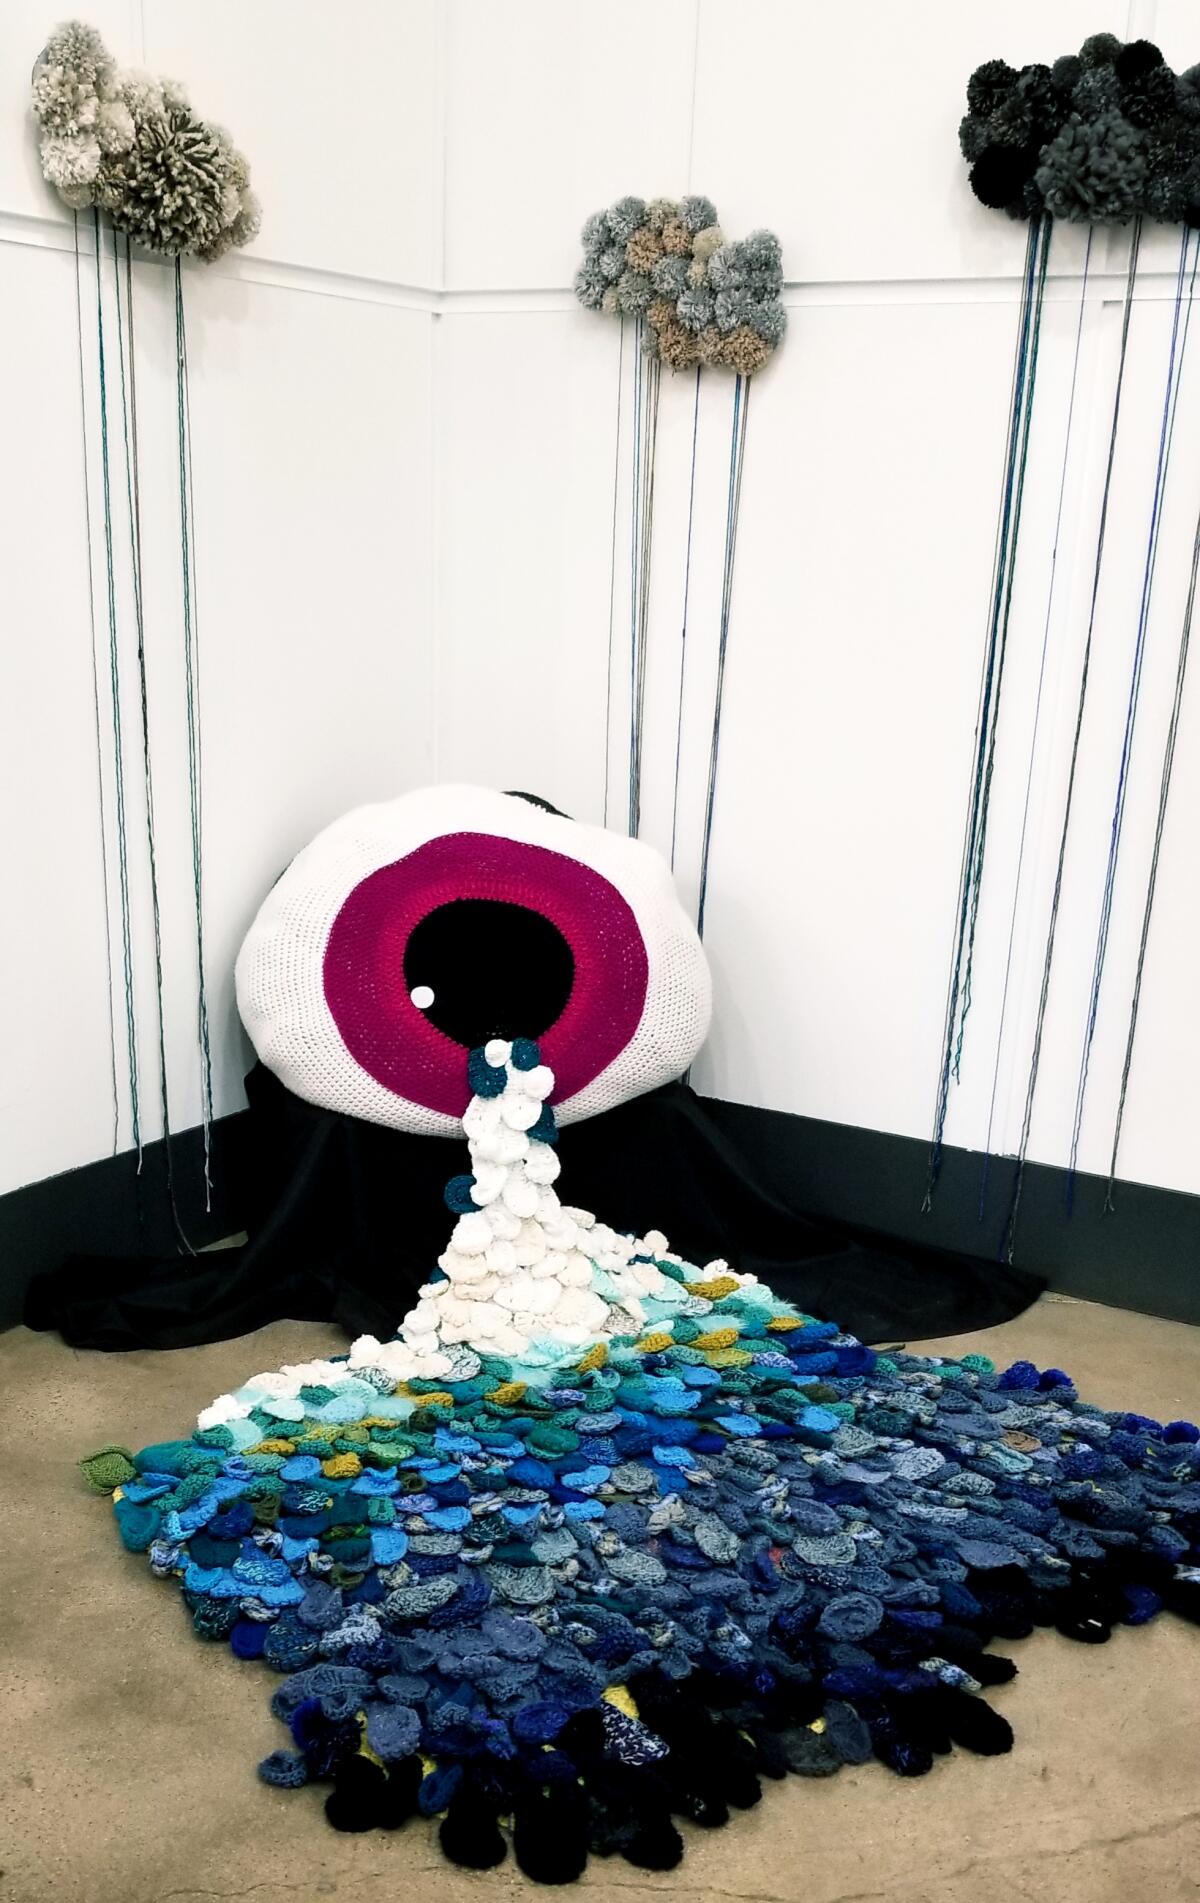 The Threadwinners’ “Lack of Emotion,” on display at their “zer | o” exhibit at WorkWell in Irvine, is made from recycled crocheted tears from their previous art project, “Weeping Willows,” a fundraiser for ACLU that decried the Trump administration’s separation of children at the border.